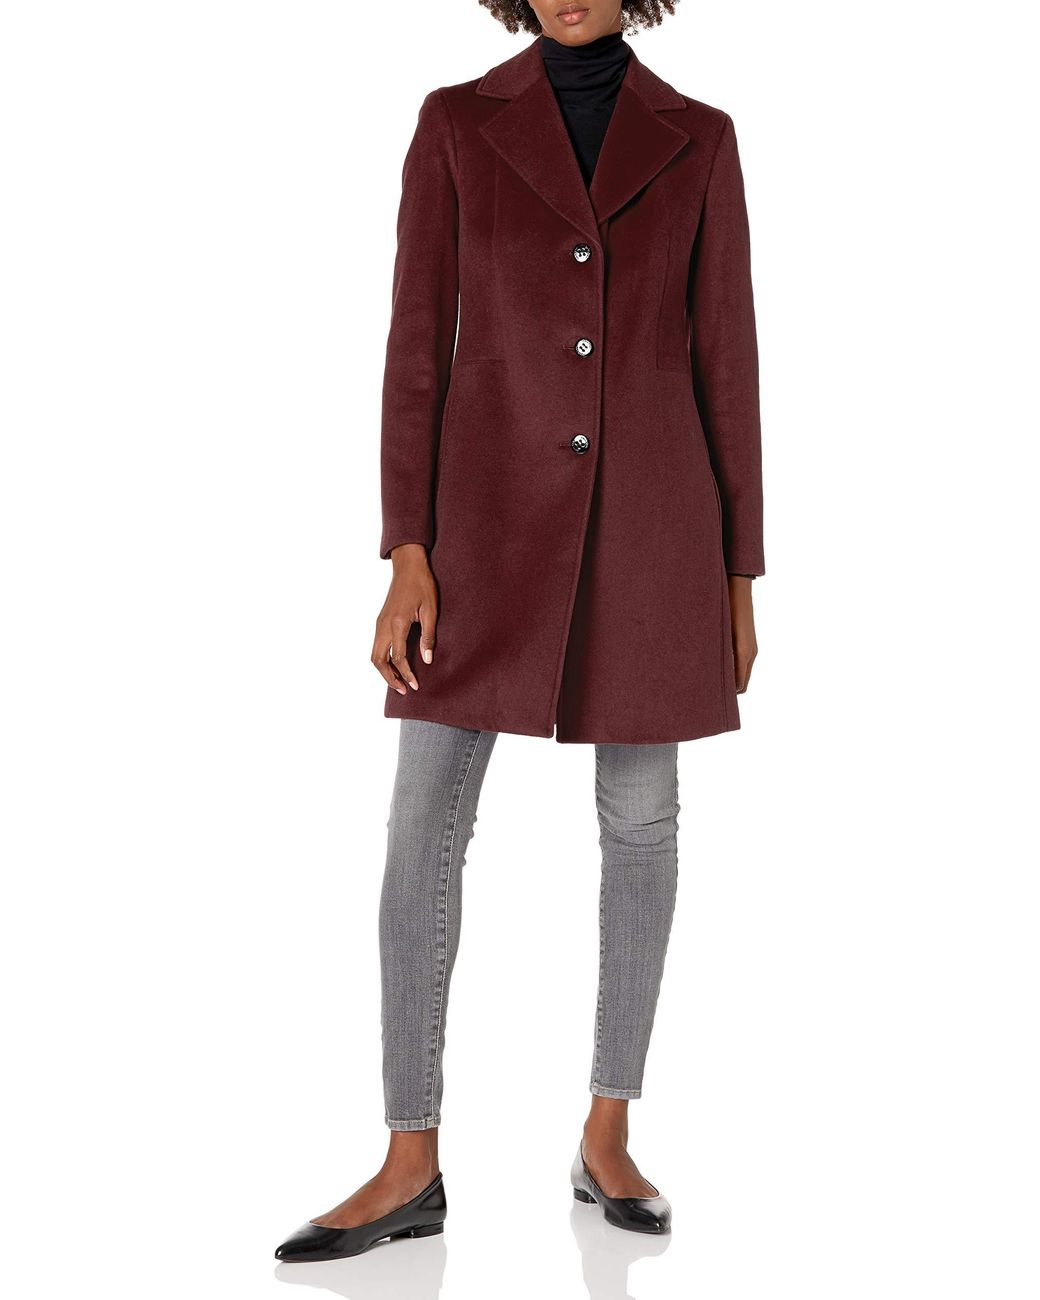 Calvin Klein Classic Cashmere Wool Blend Coat in Red - Lyst